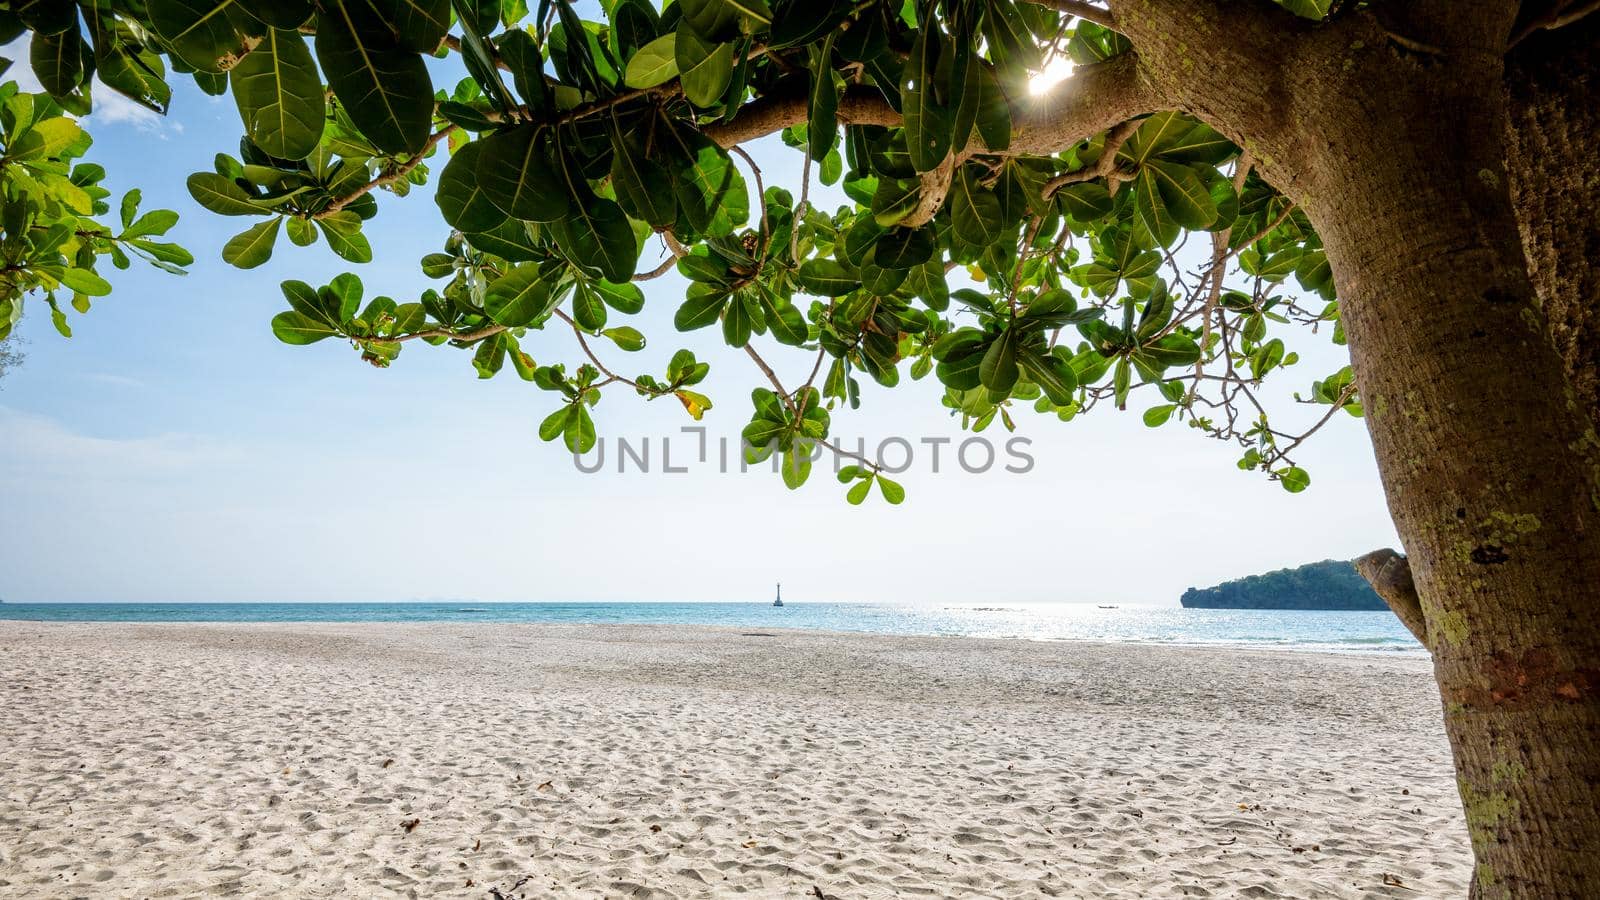 Beautiful nature landscape beach and sea under the sunlight in summer, tree with large green leaves of the Terminalia catappa at Koh Tarutao, Tarutao National Park, Satun, Thailand